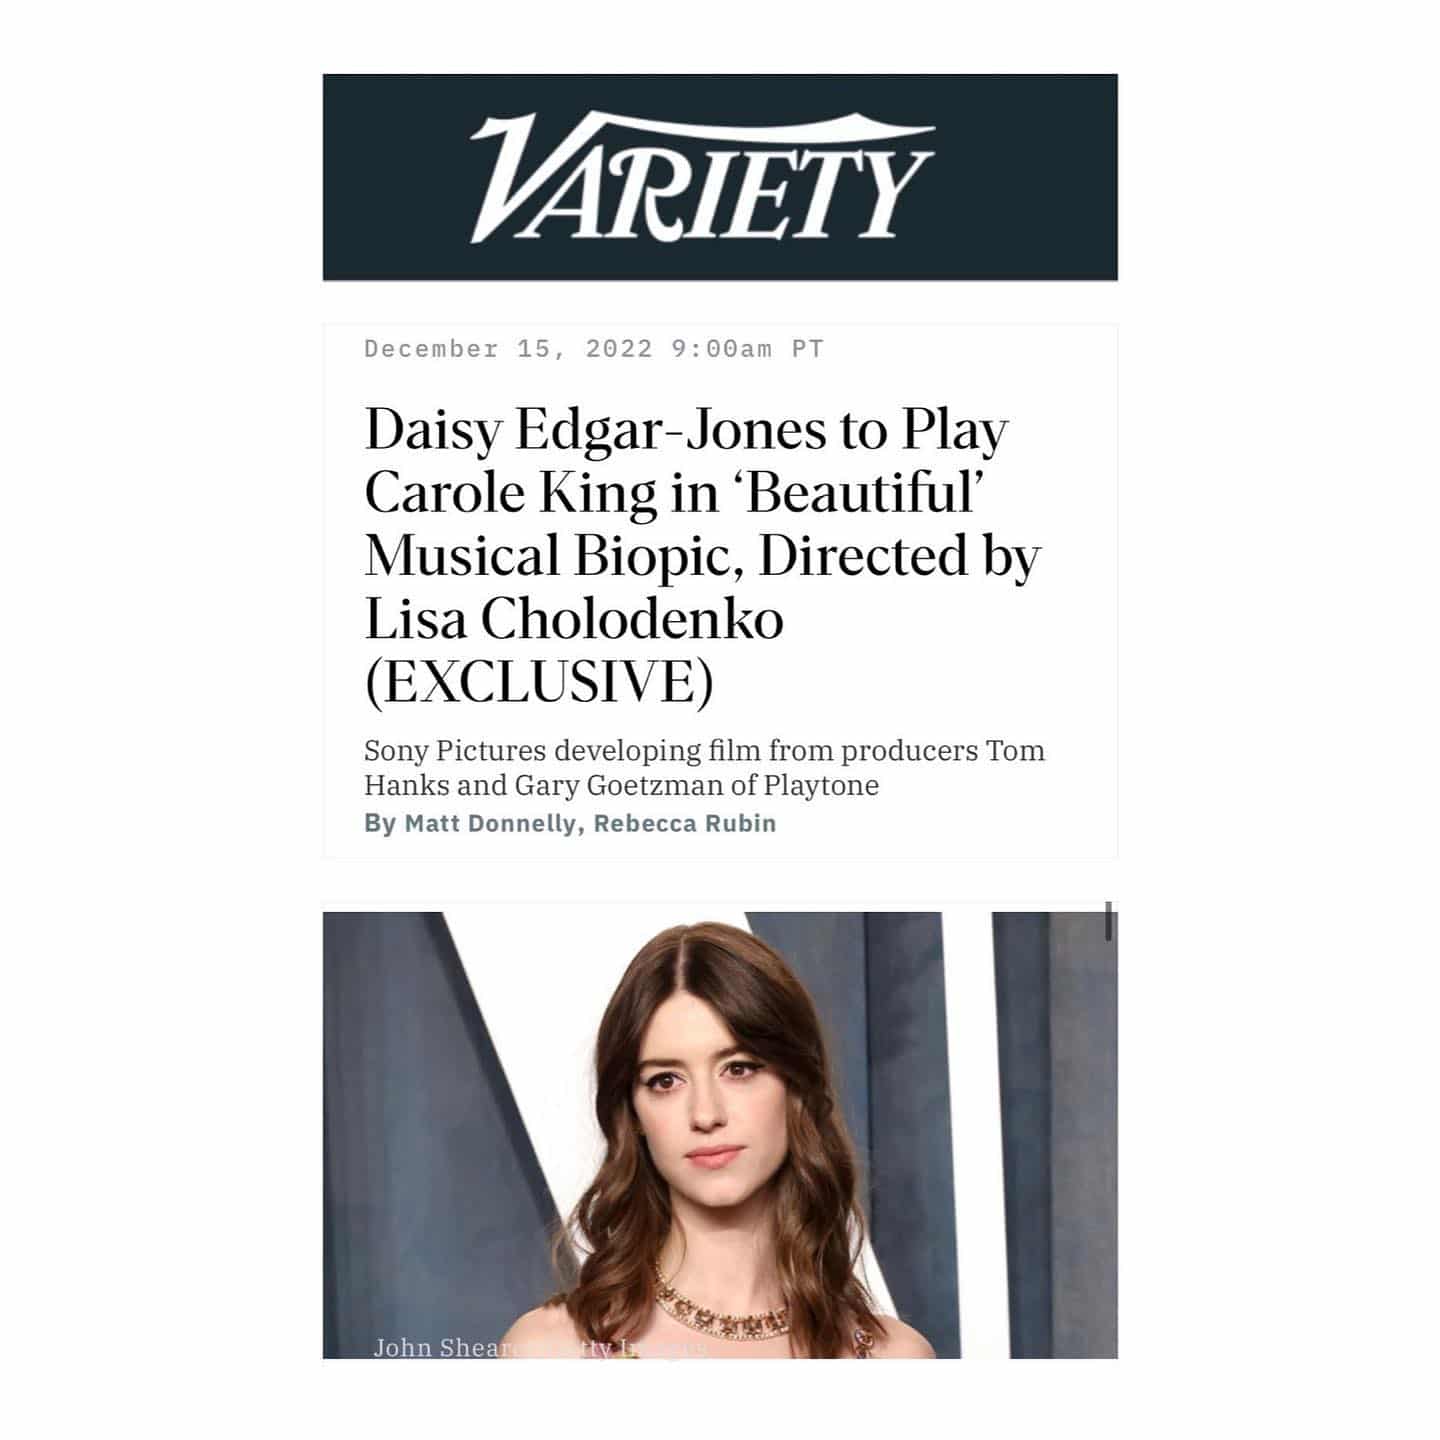 @daisyedgarjones announced to play Carole King in the @sonypictures film adaptation of the stage musical 
.
.
.
.